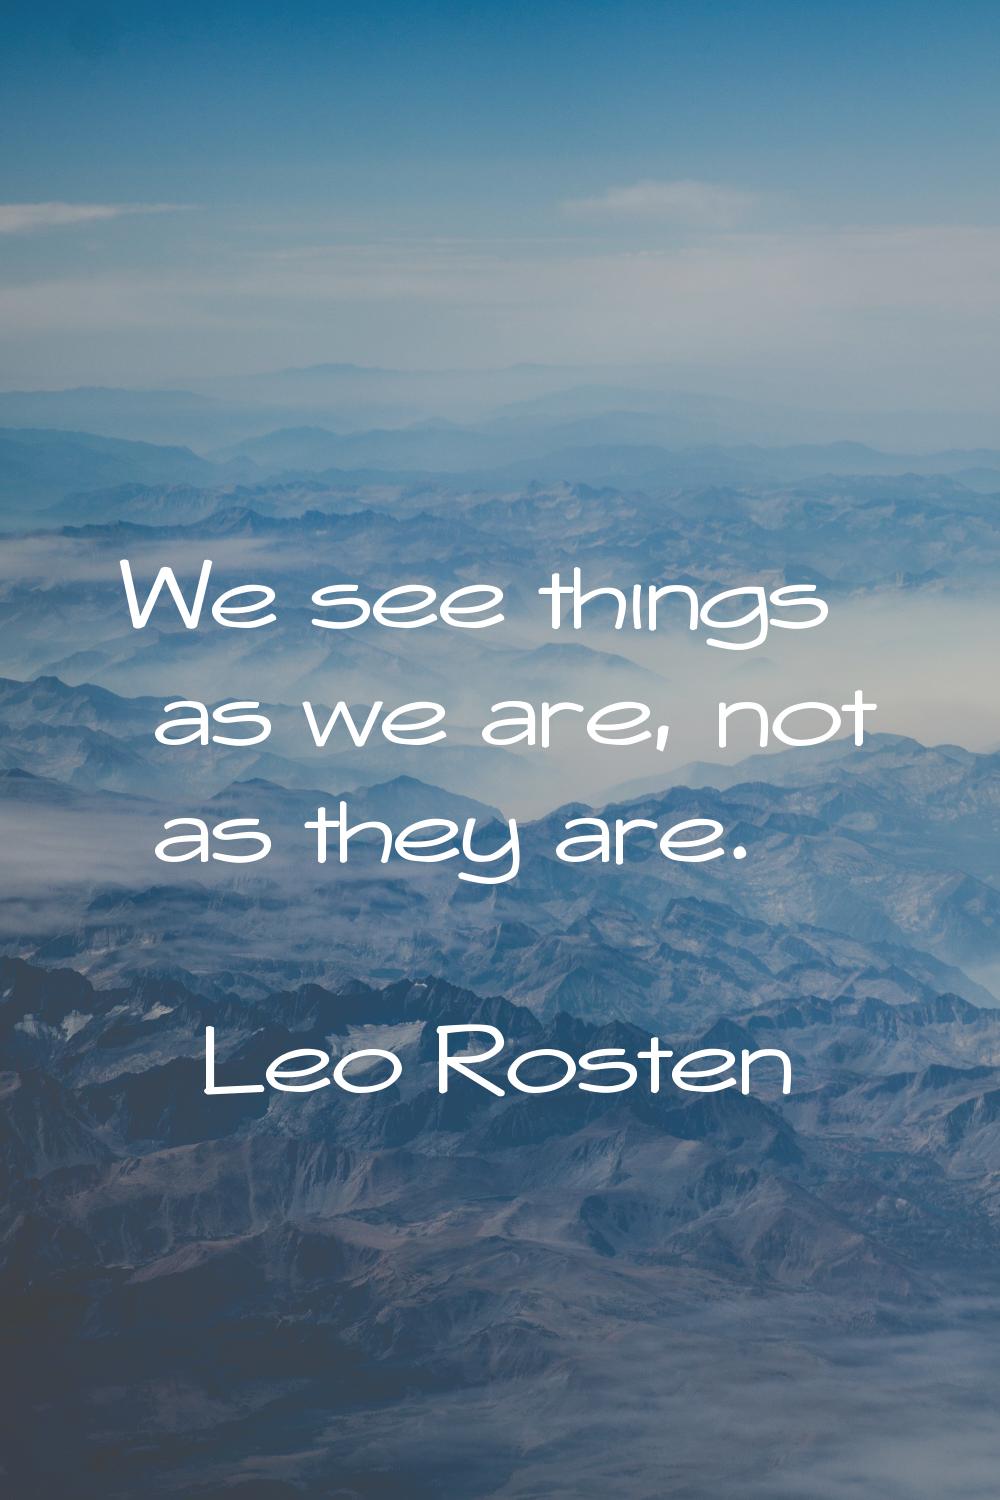 We see things as we are, not as they are.